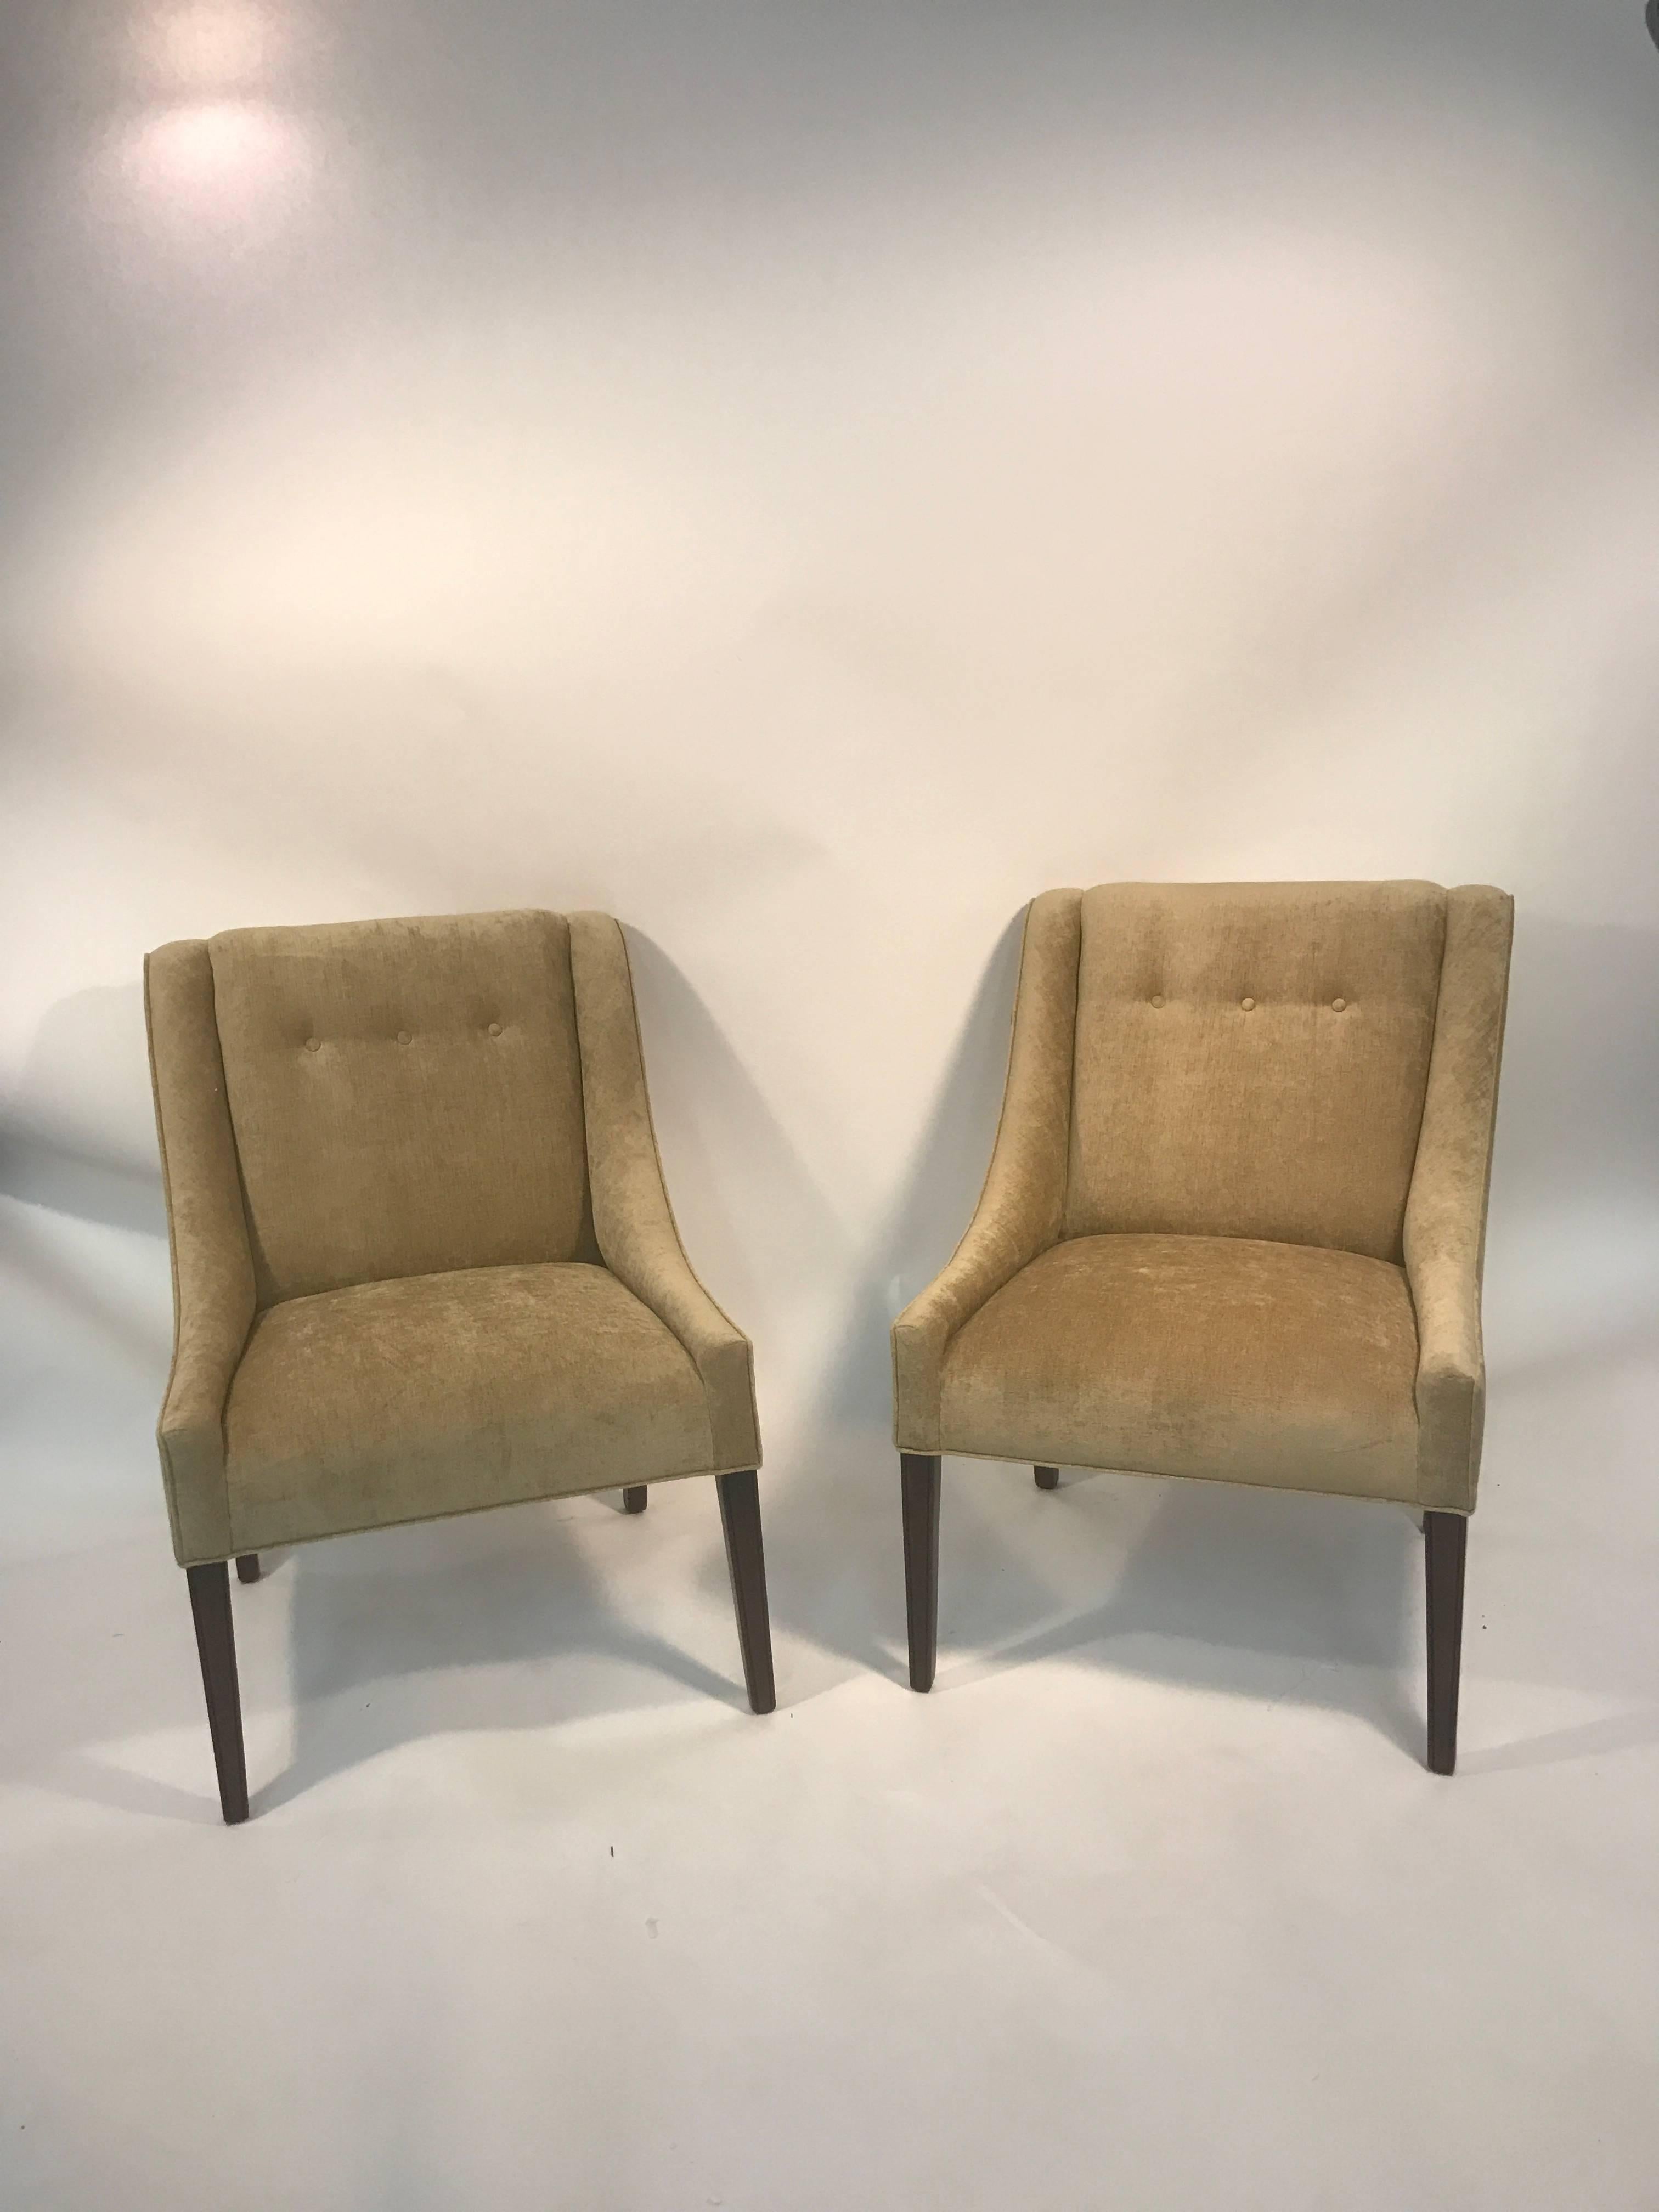 An elegant pair of button tufted slipper chairs with beautiful upholstery in the manner of Edward Wormley, circa 1970. Good condition.
 